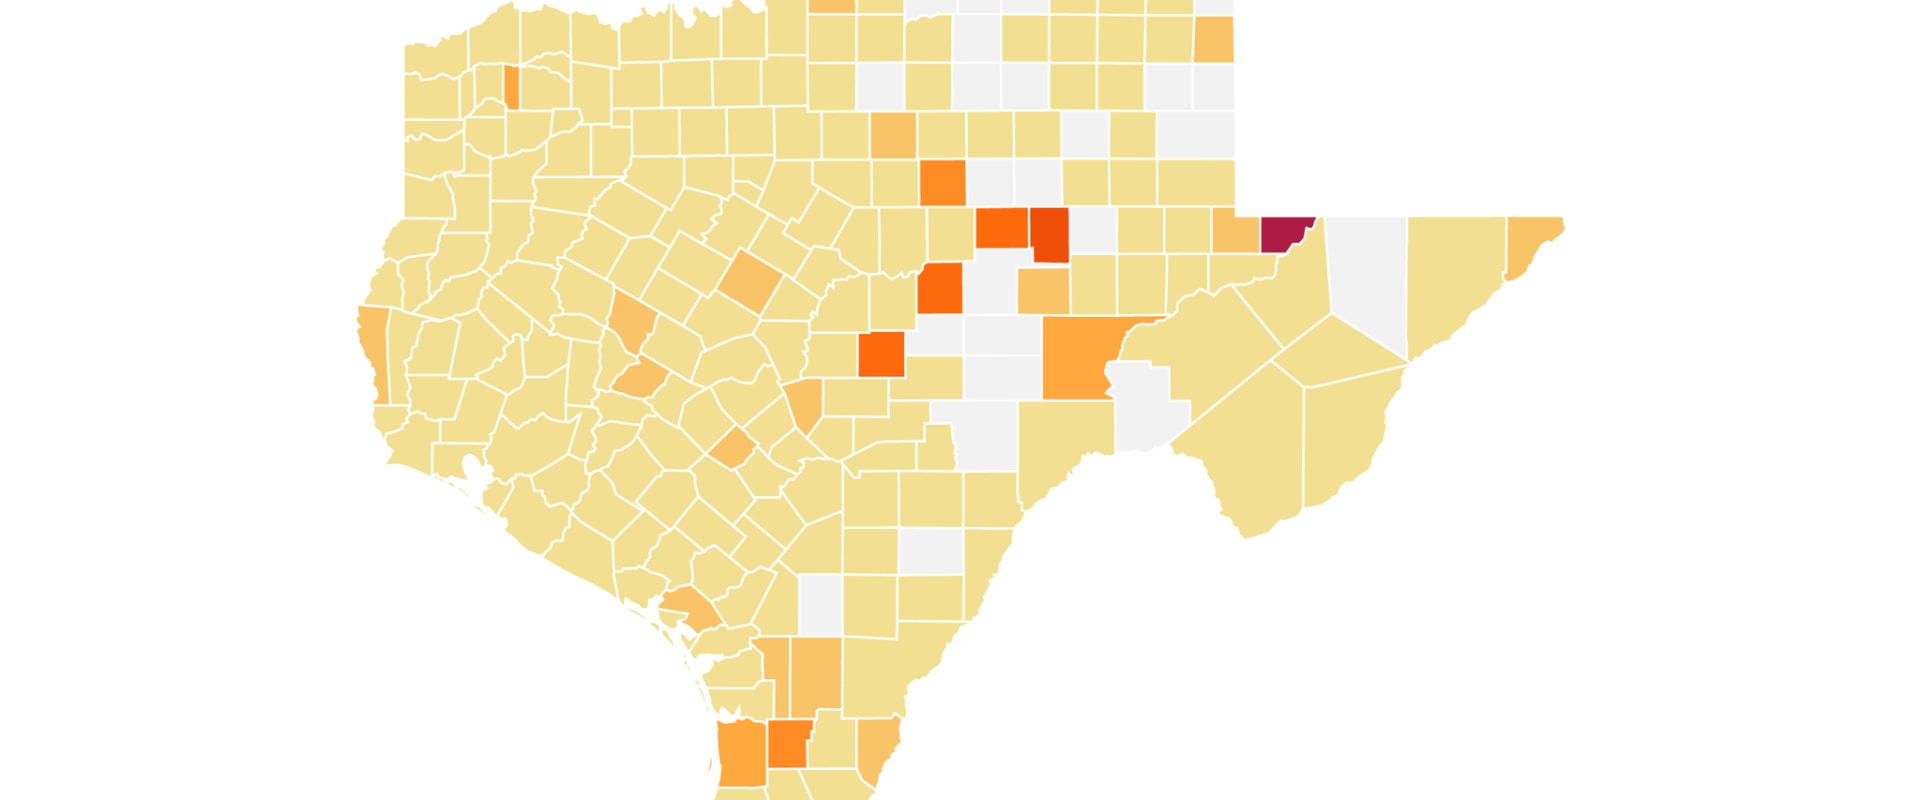 What counties in texas are open?